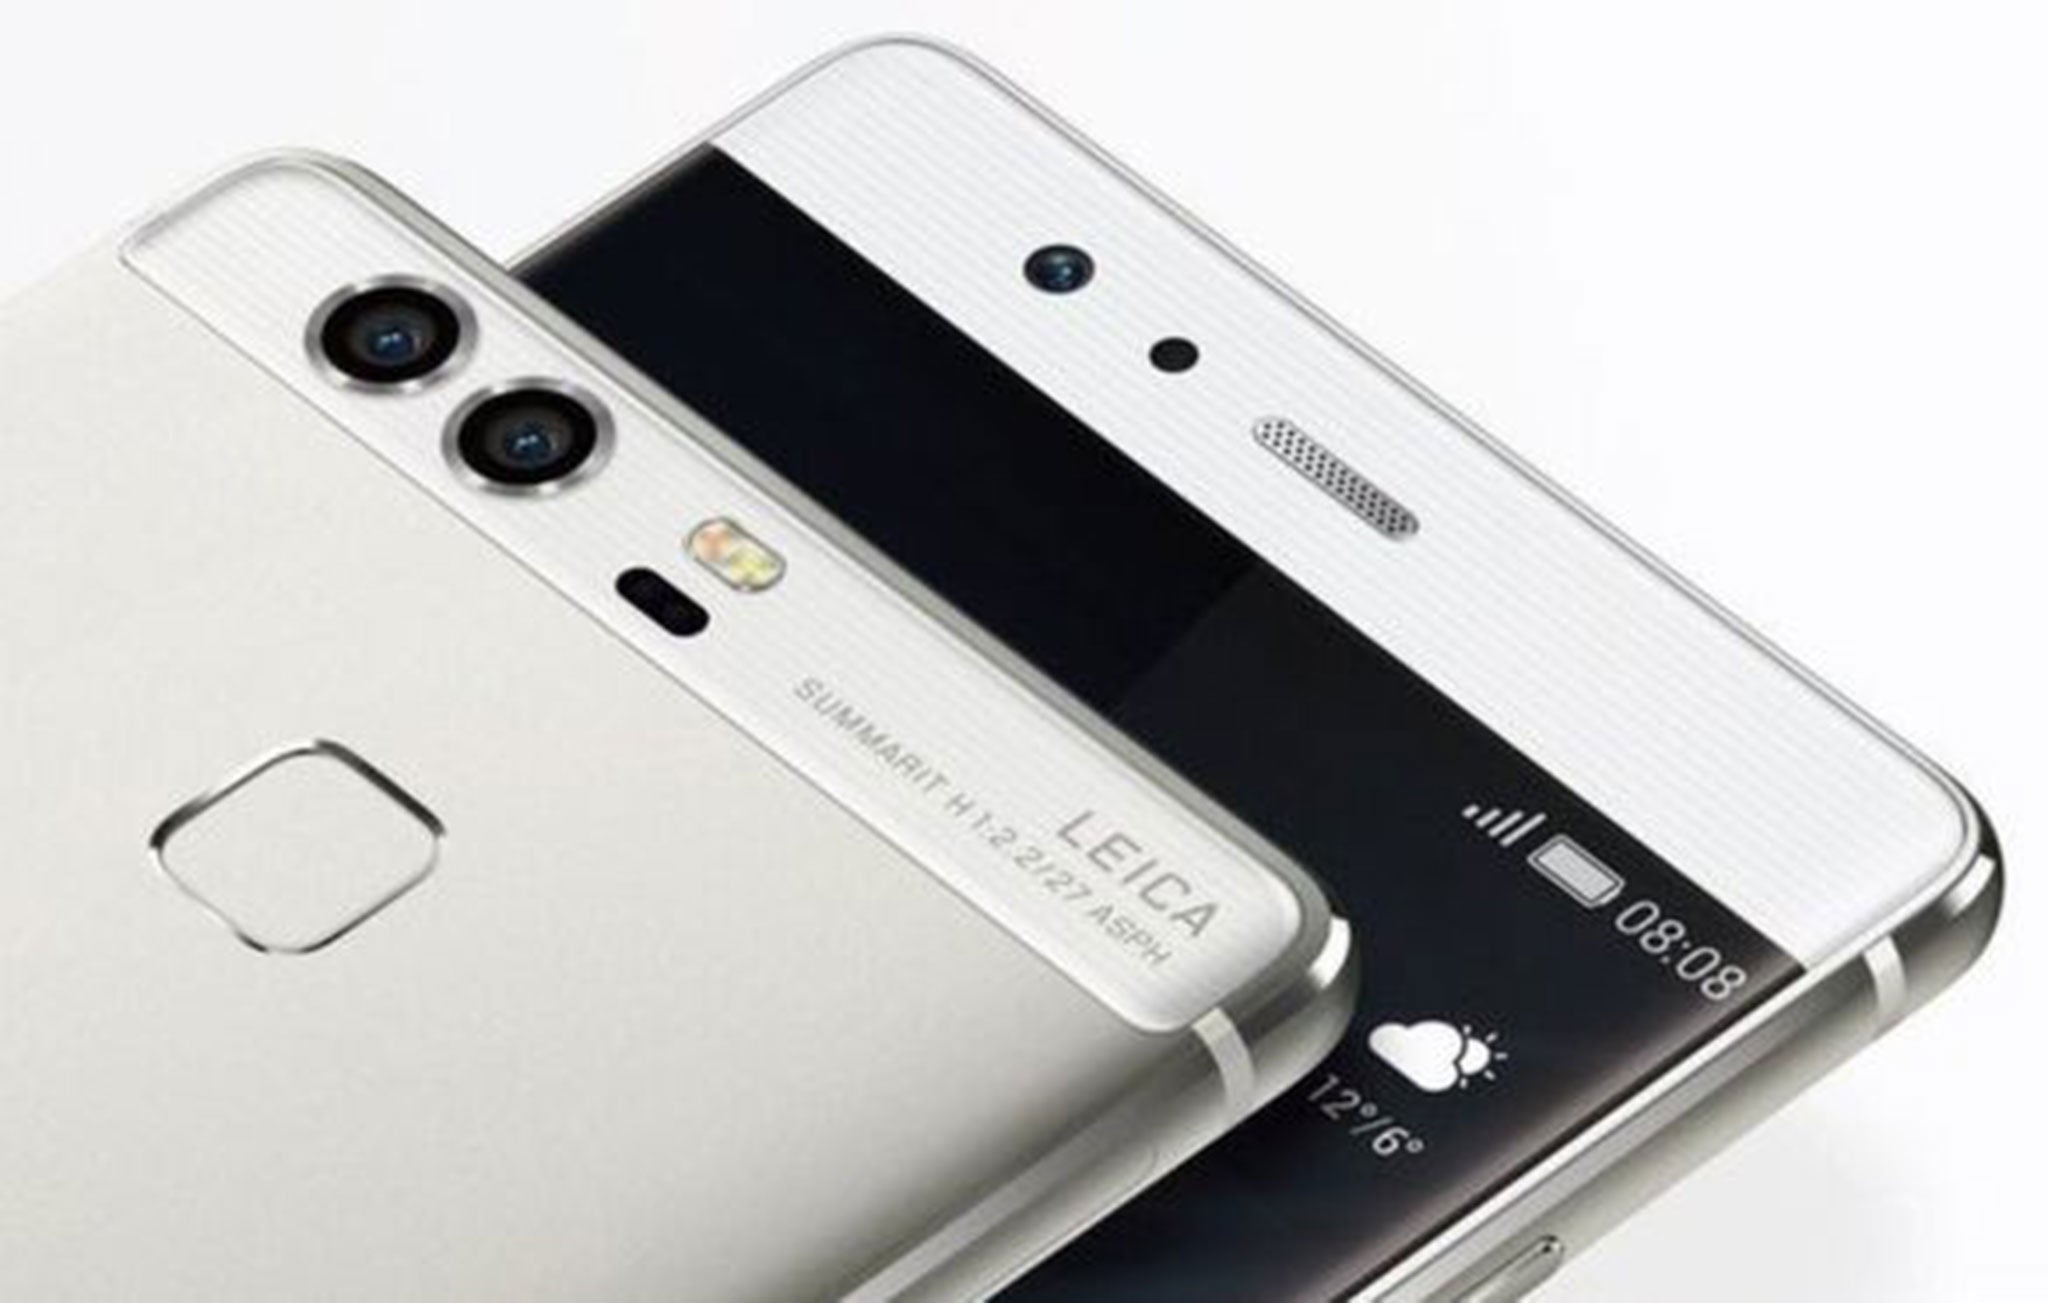 Huawei's new phone has two cameras on the rear, to allow users to change the focus of pictures after they've been taken